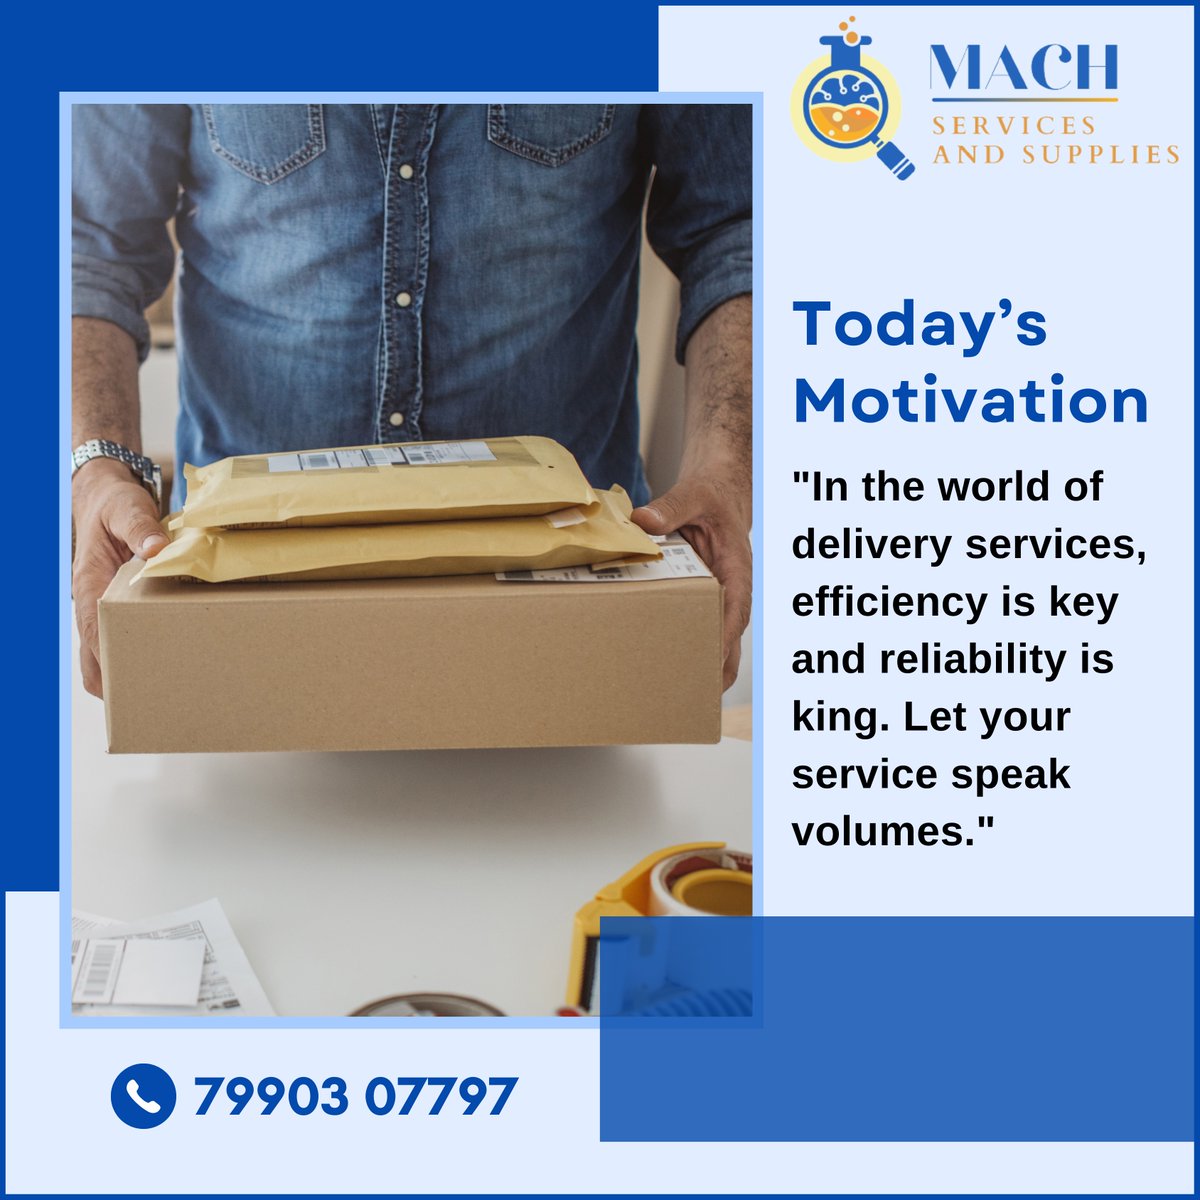 Today's Motivation.
.
.
#delivery #machservicesandsupplies #machservices #deliveryservice #style #love #instagood #like #photography #motivation #motivationalquotes #inspiration #surat #suratcity #suratfood #suratphotoclub #sunofcitysurat #sürat #wearehiring #india #trending